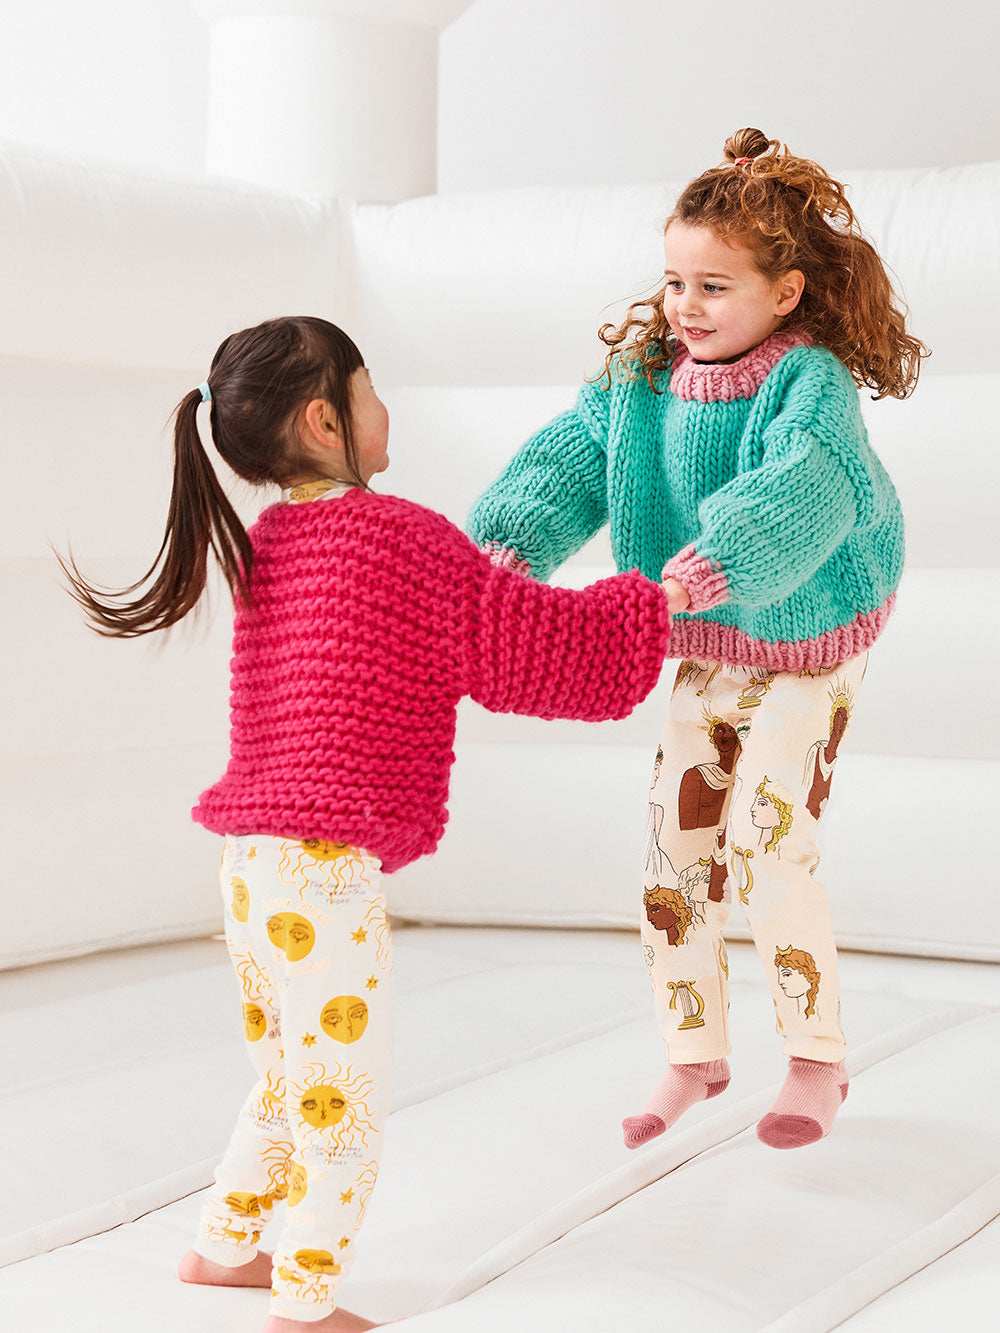 Two girls are jumping on a white jumping castle, they are both wearing chunky knitted jumpers and cardigans